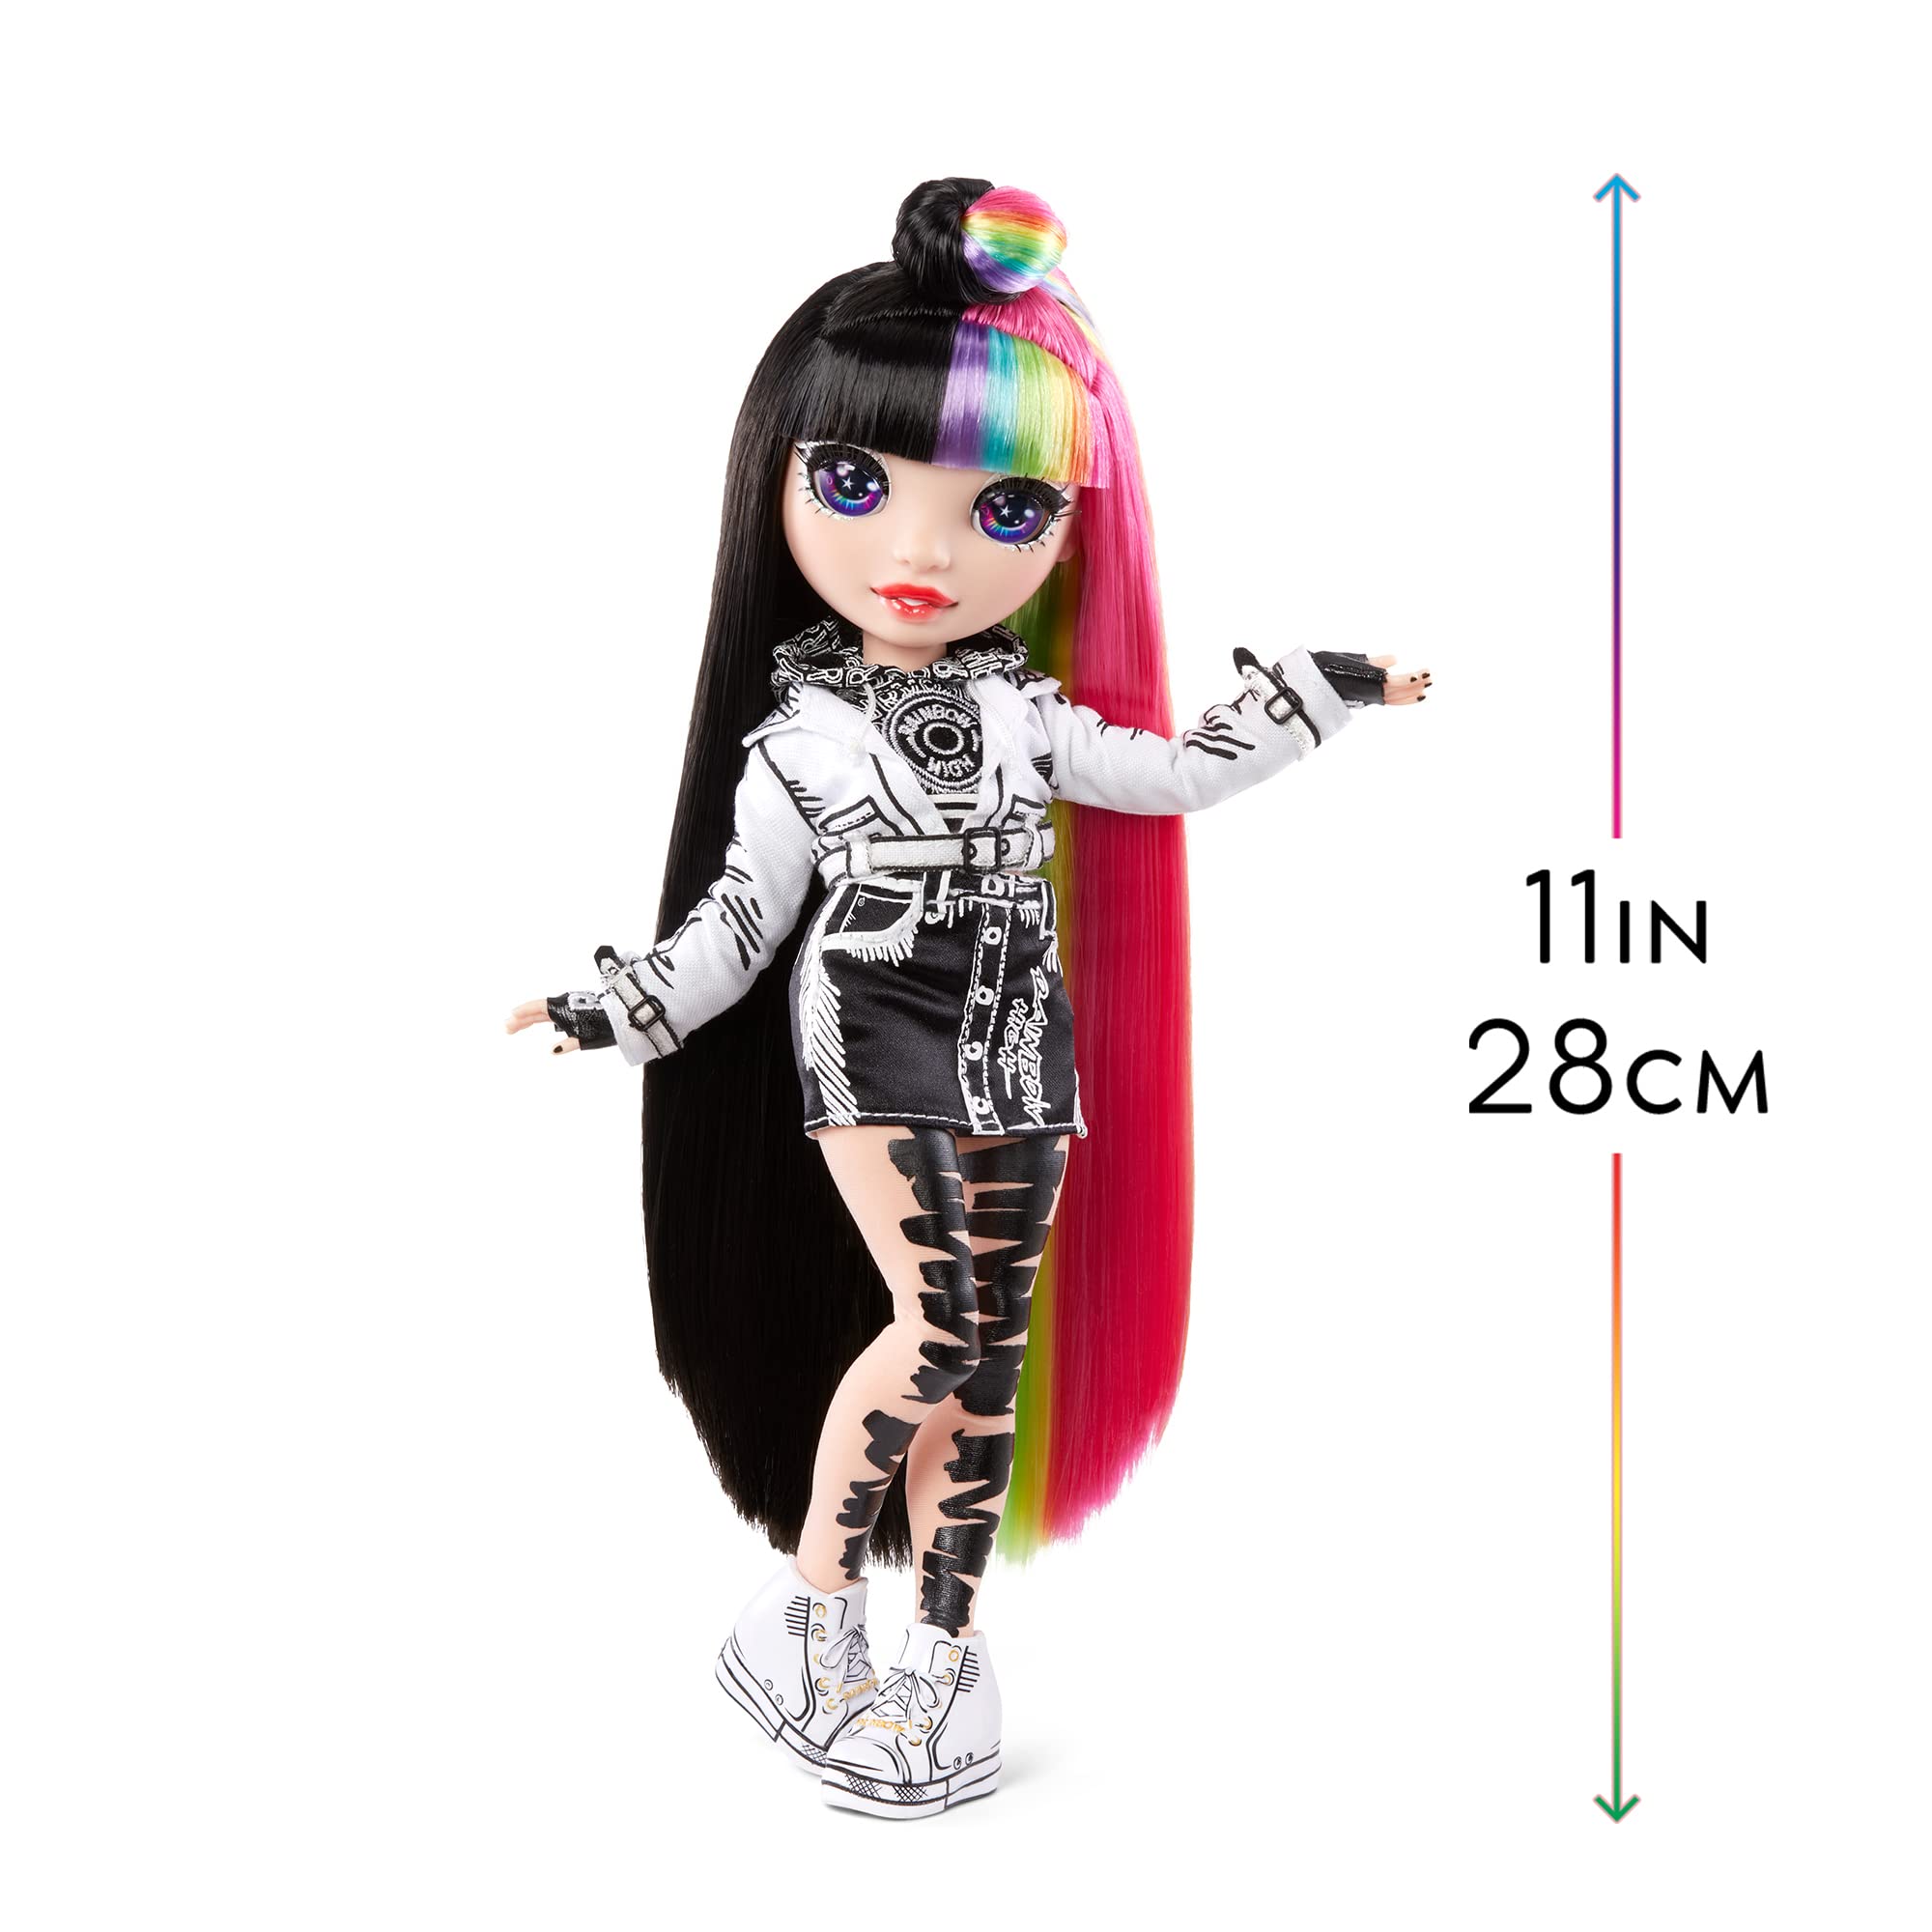 Rainbow High 2021 Jett Dawson Collector Fashion Doll with Black and Rainbow Hair, 2 Designer Outfits to Mix & Match Accessories, Gift for Kids & Collectors, Toys for Kids Ages 6 7 8+ to 12 Years